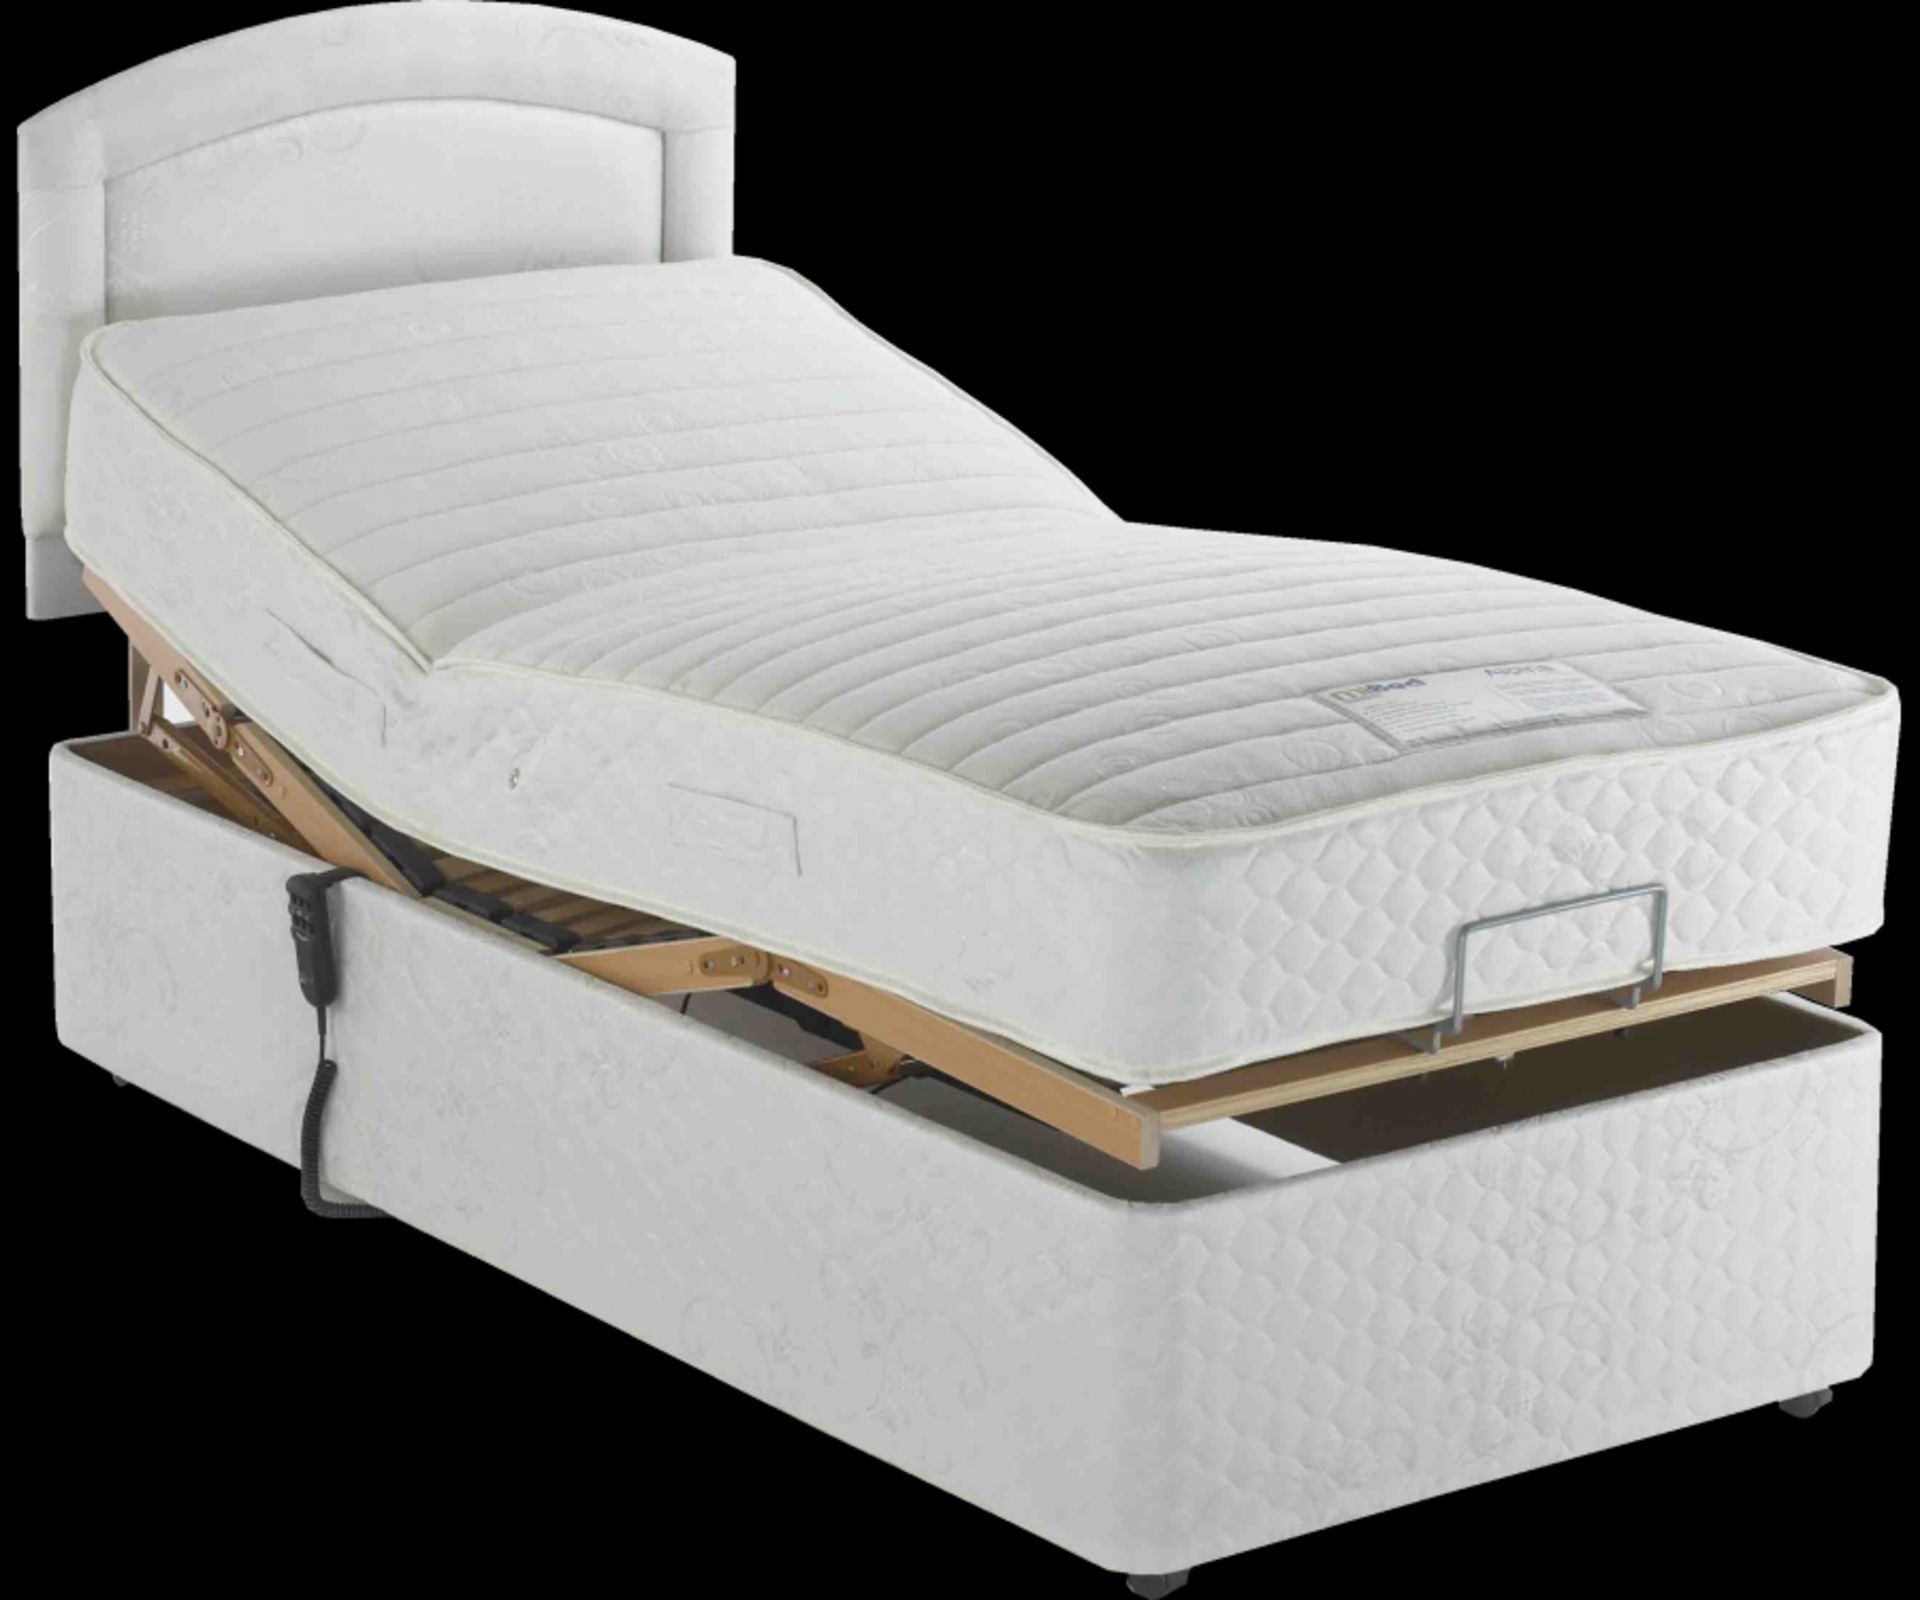 Brand New 2'6 Small Single Alpina Pocket Electric Adjustable Bed - Image 2 of 2